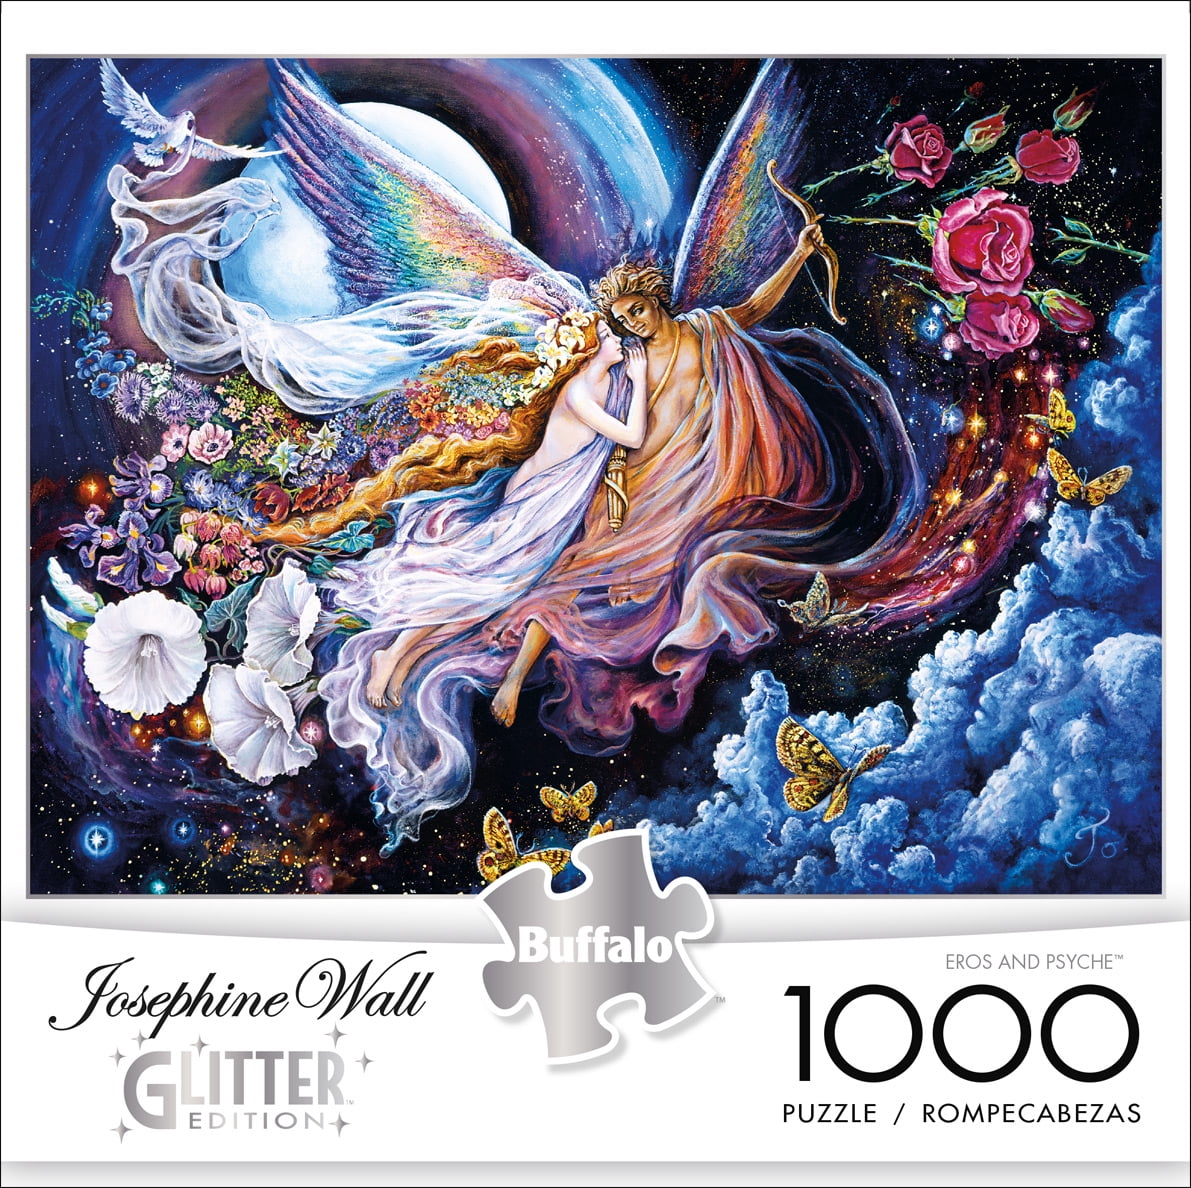 The Untold Story Glitter Edition Josephine Wall 1000 Piece Jigsaw Puzzle 